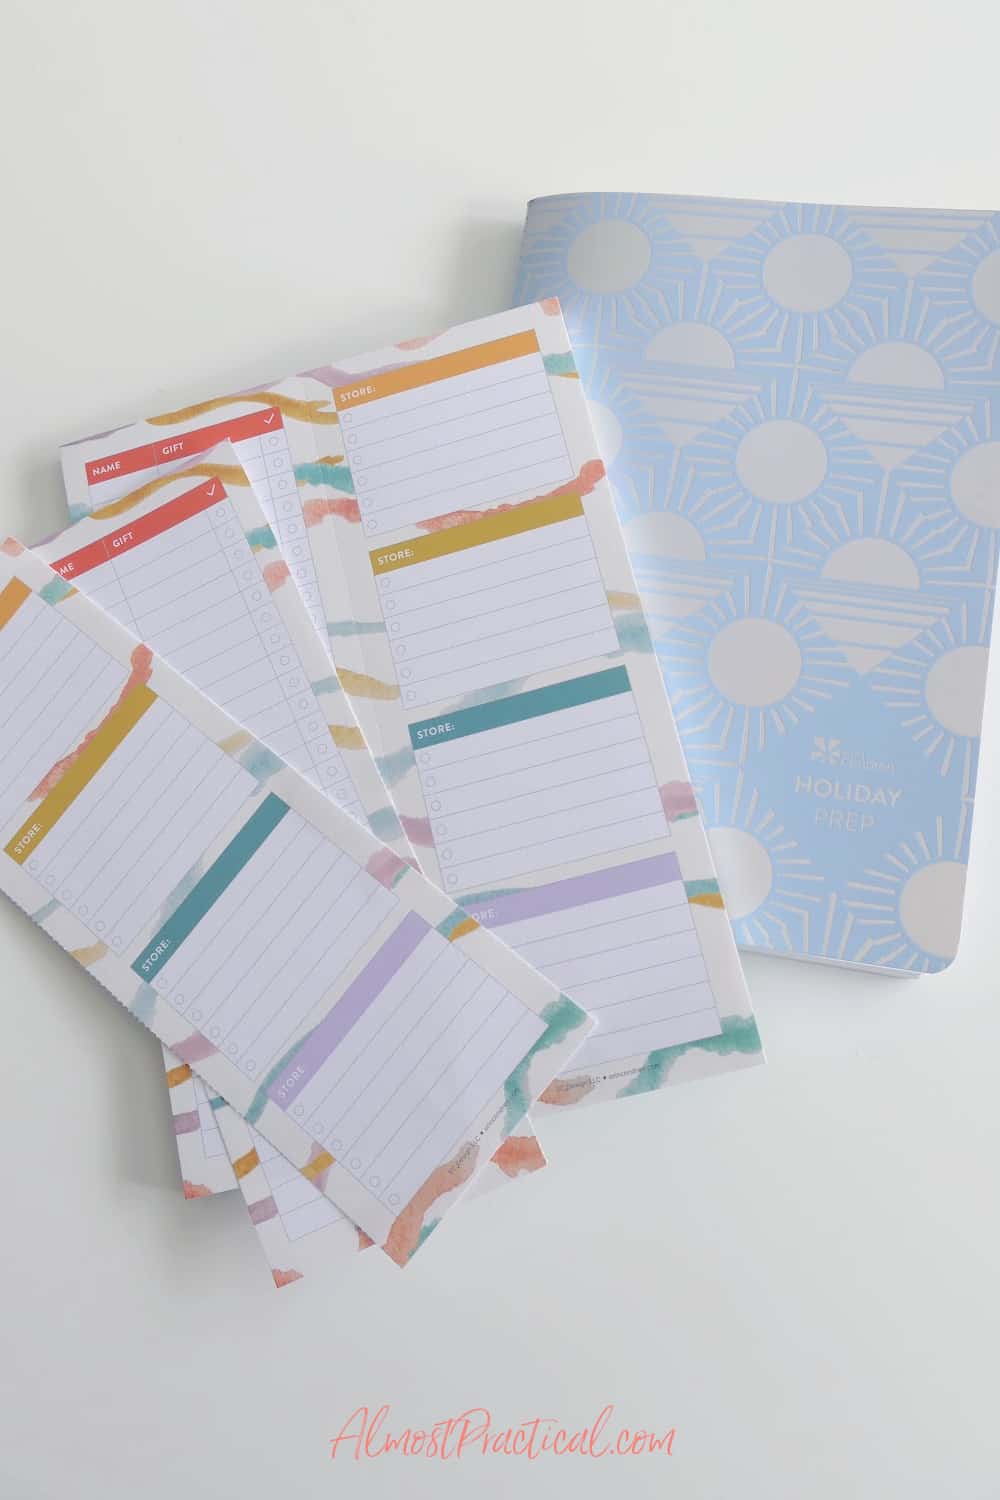 A notepad for a holiday gift list and a planning notebook.